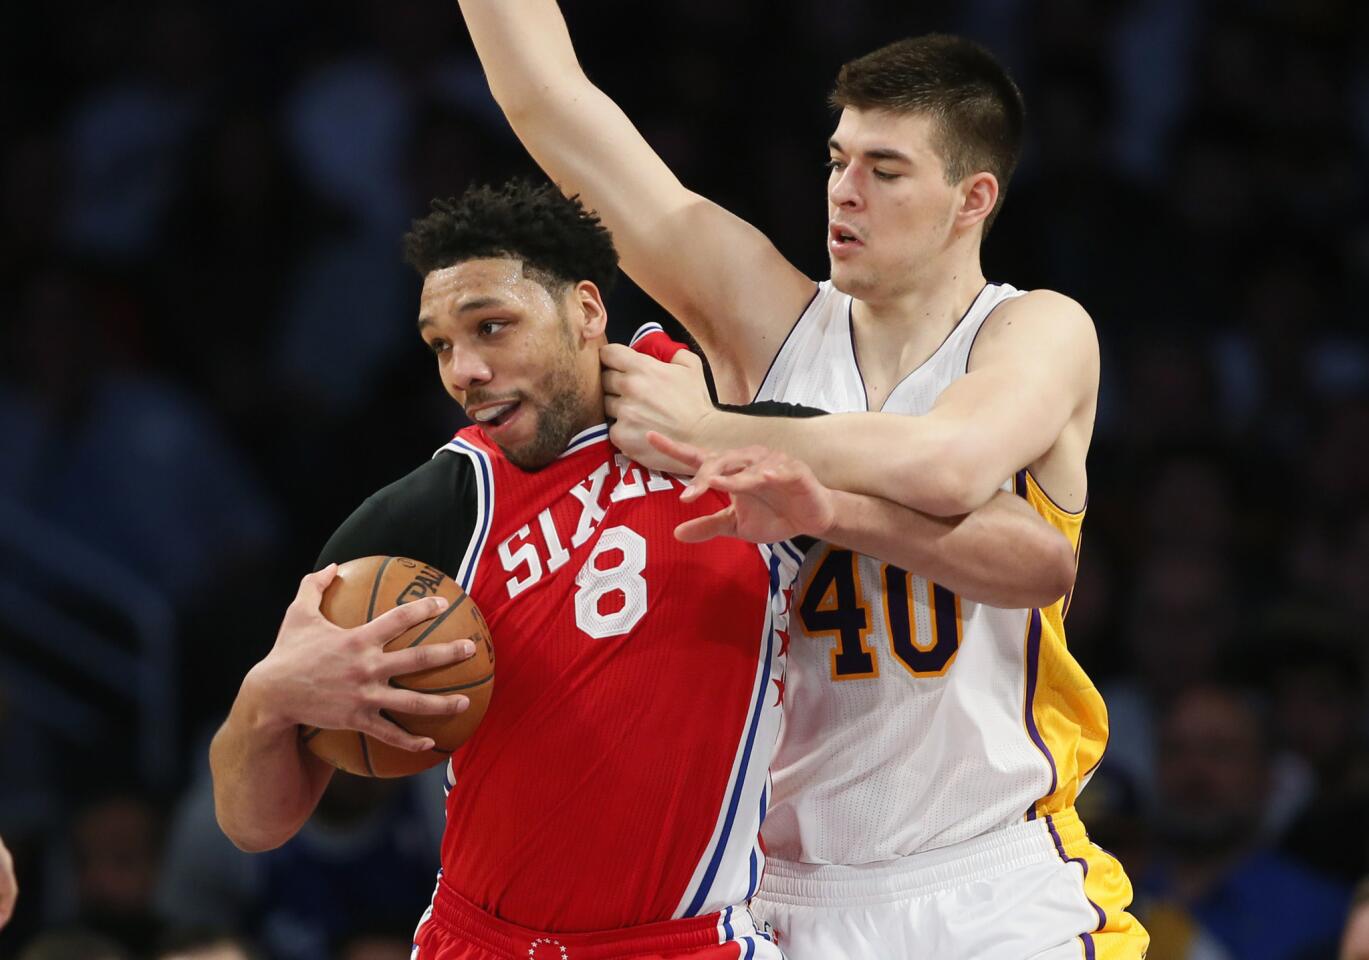 76ers center Jahlil Okafor (8) controls the ball while working in the post against Lakers center Ivica Zubac during the first half.